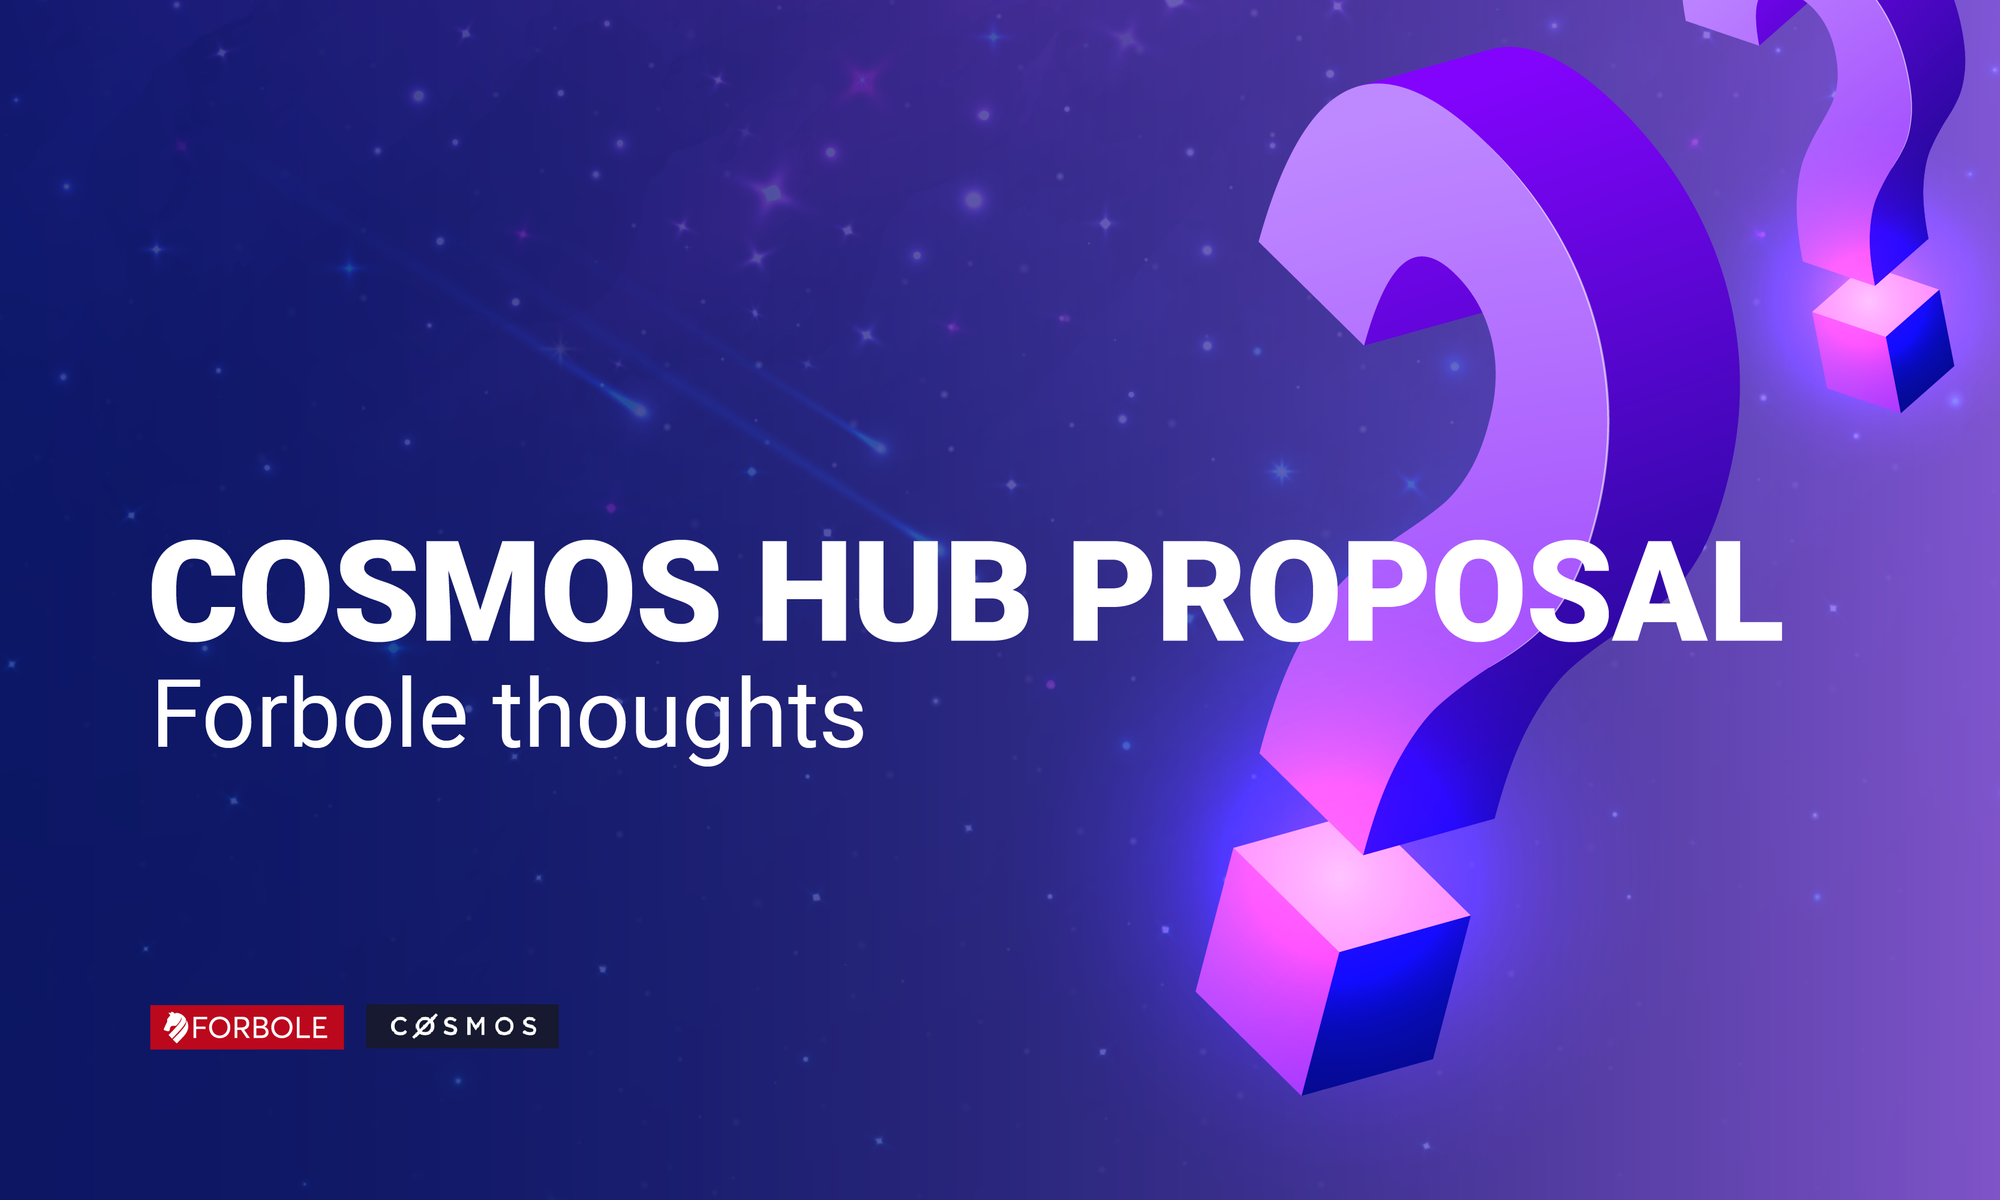 Forbole’s thought on Cosmos Hub Proposal 34